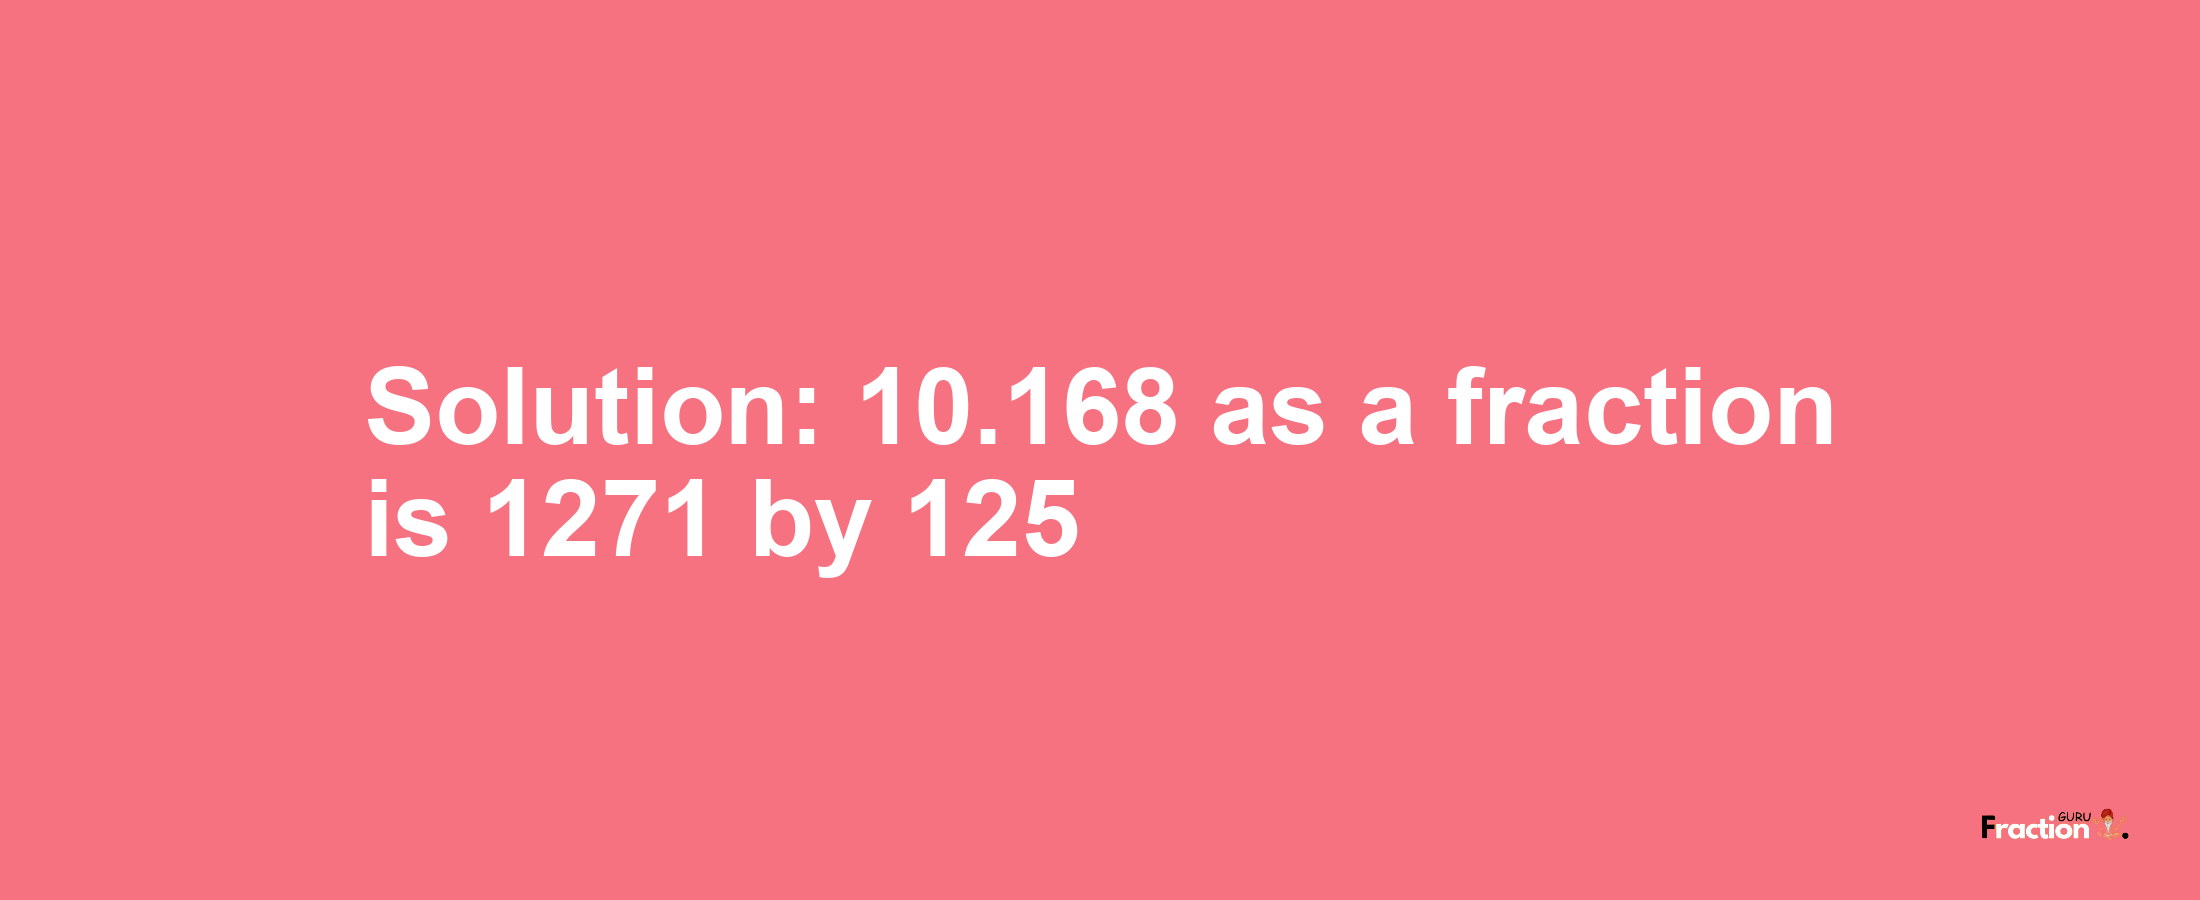 Solution:10.168 as a fraction is 1271/125